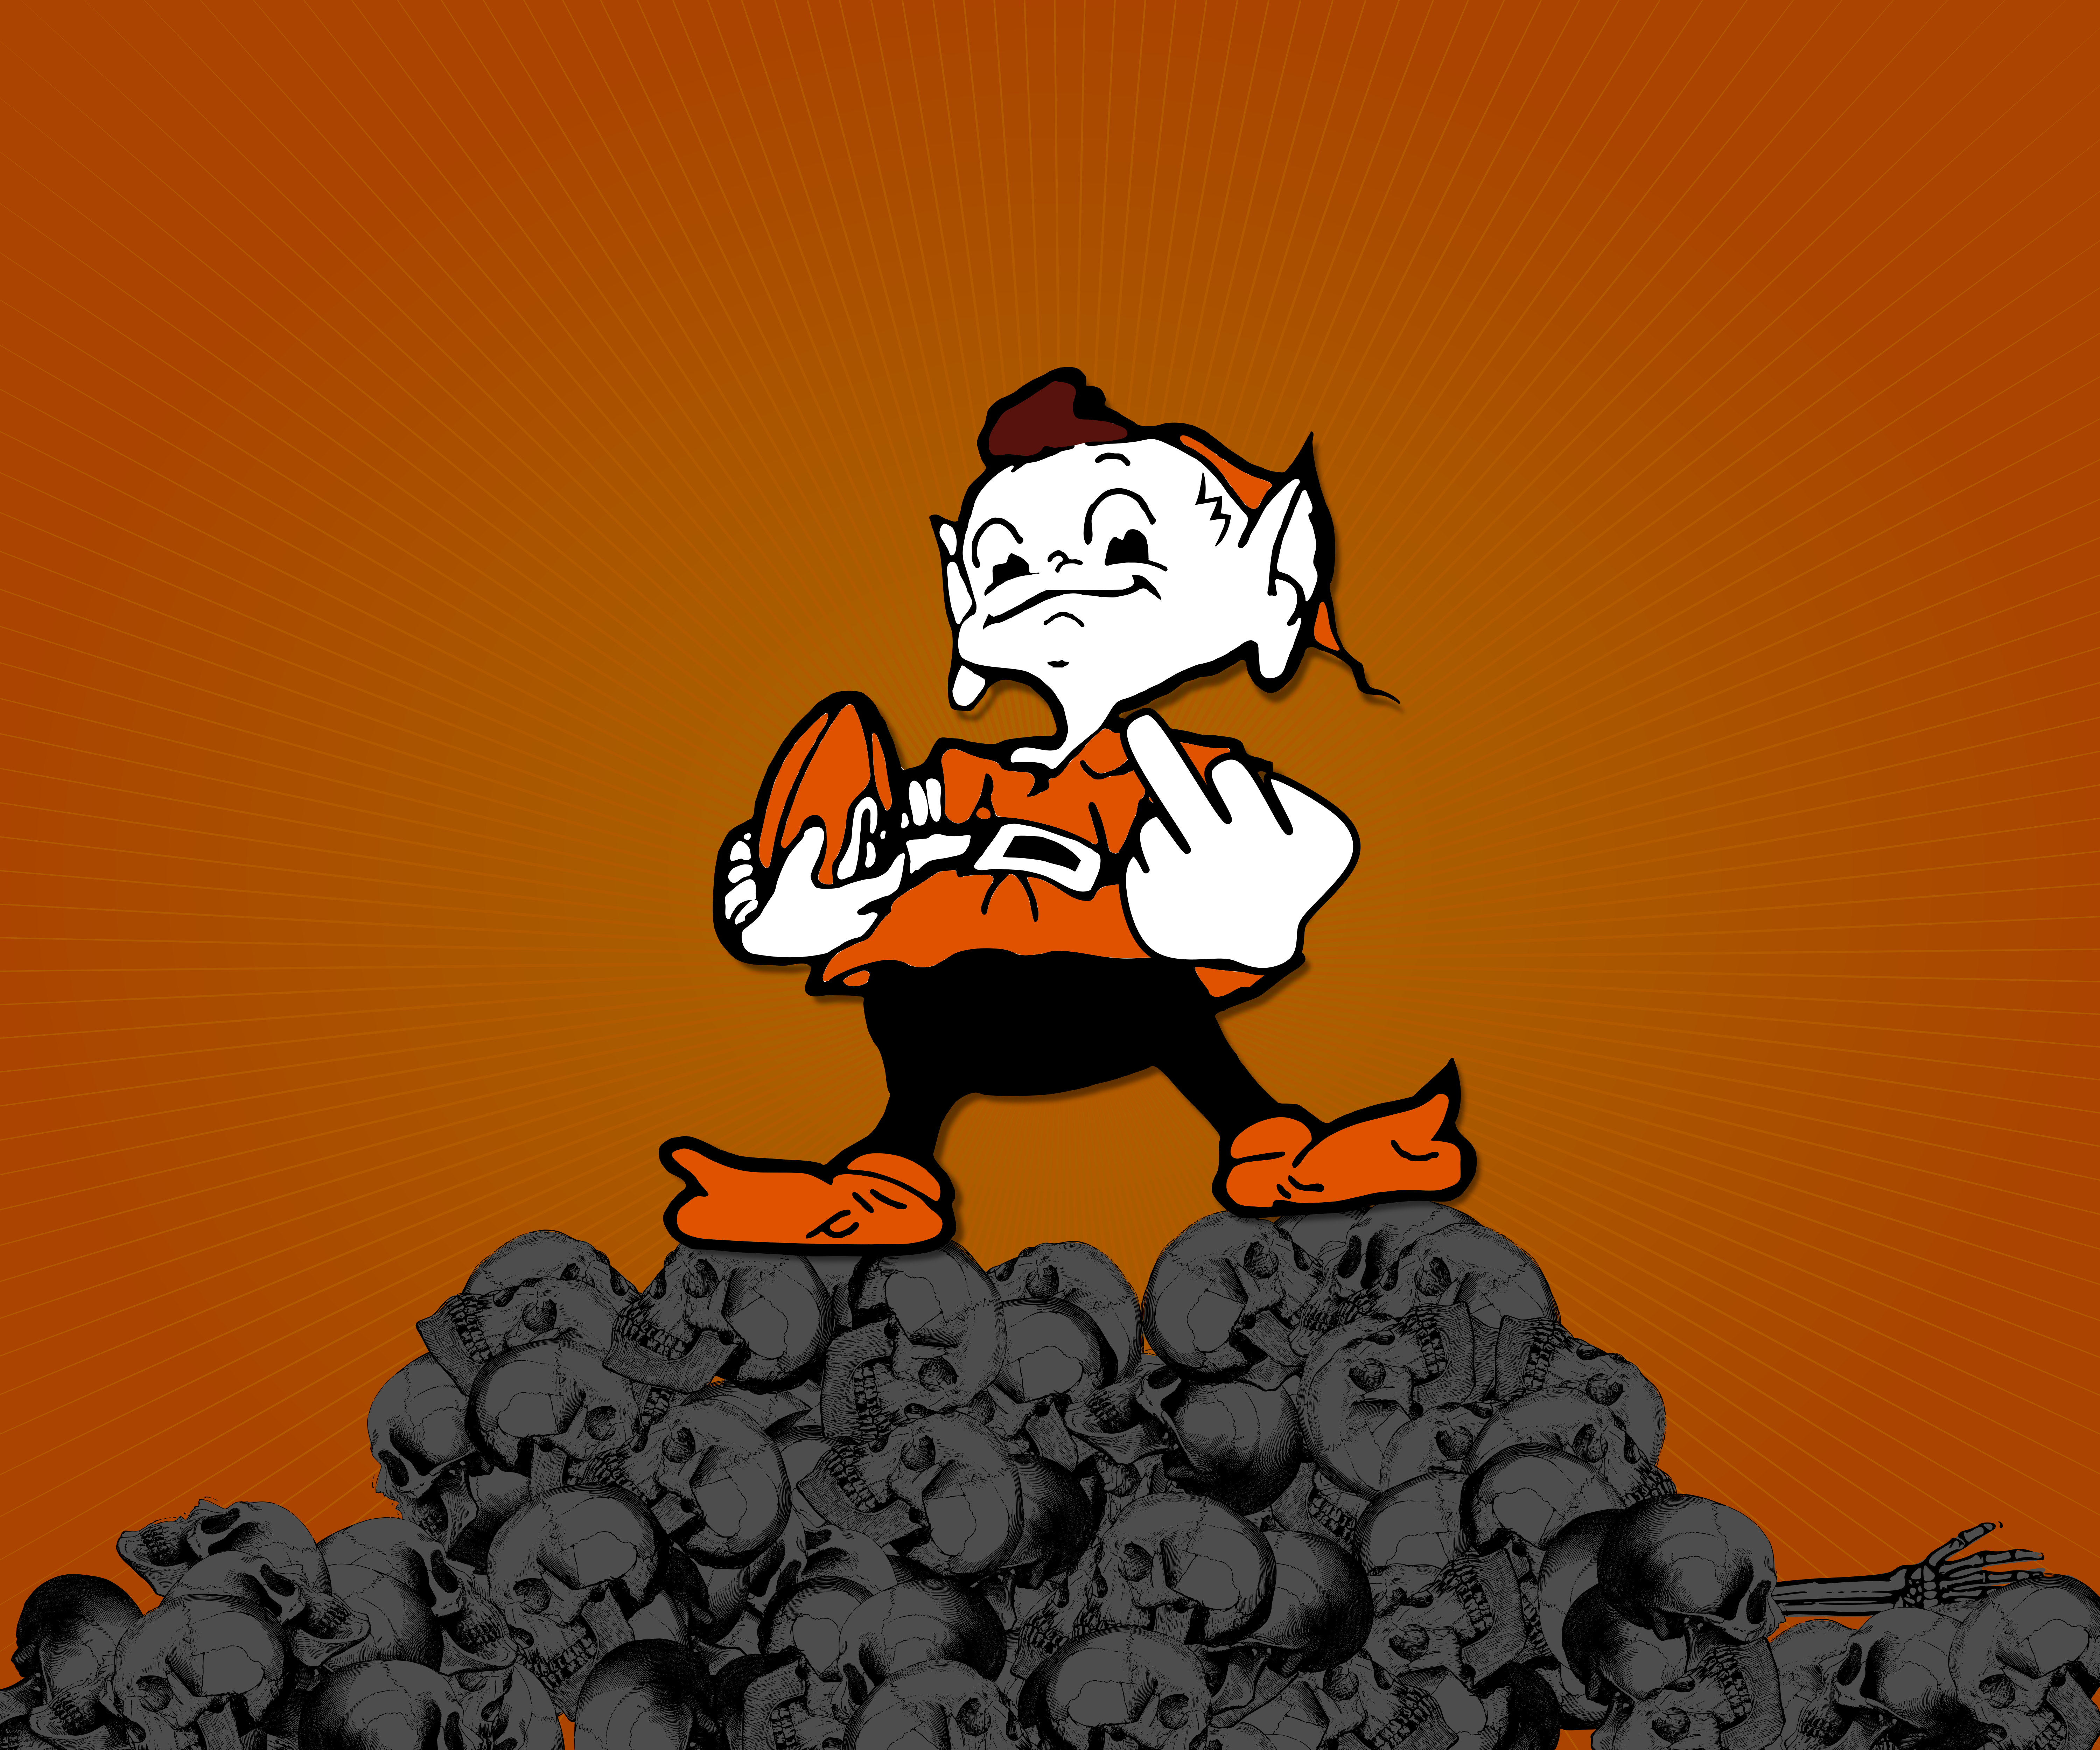 Brownie middle finger wallpaper. Let me know if you want me to change or fix something